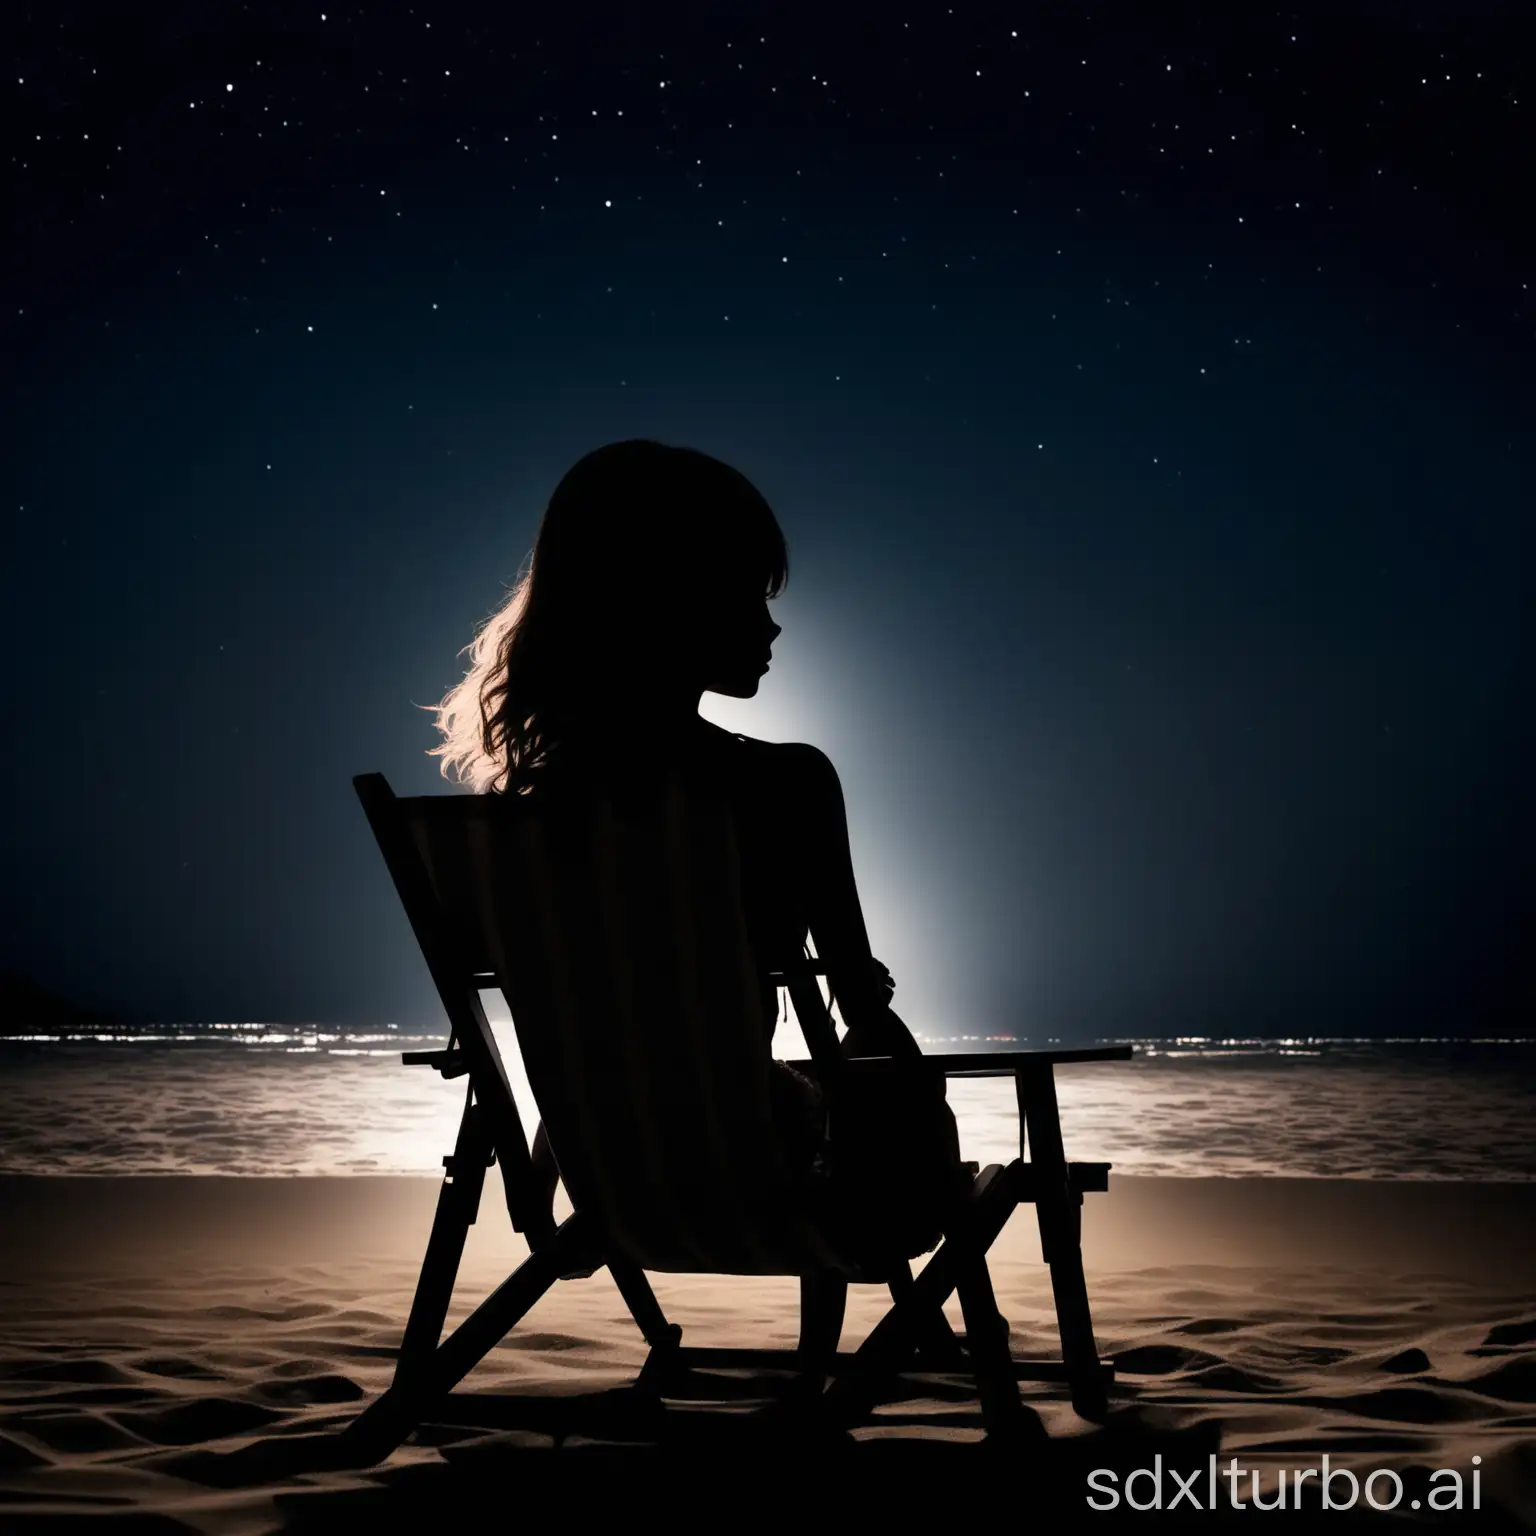 A Dreamy girl silhouette sitting on a beach chair the picture taken from behind at night